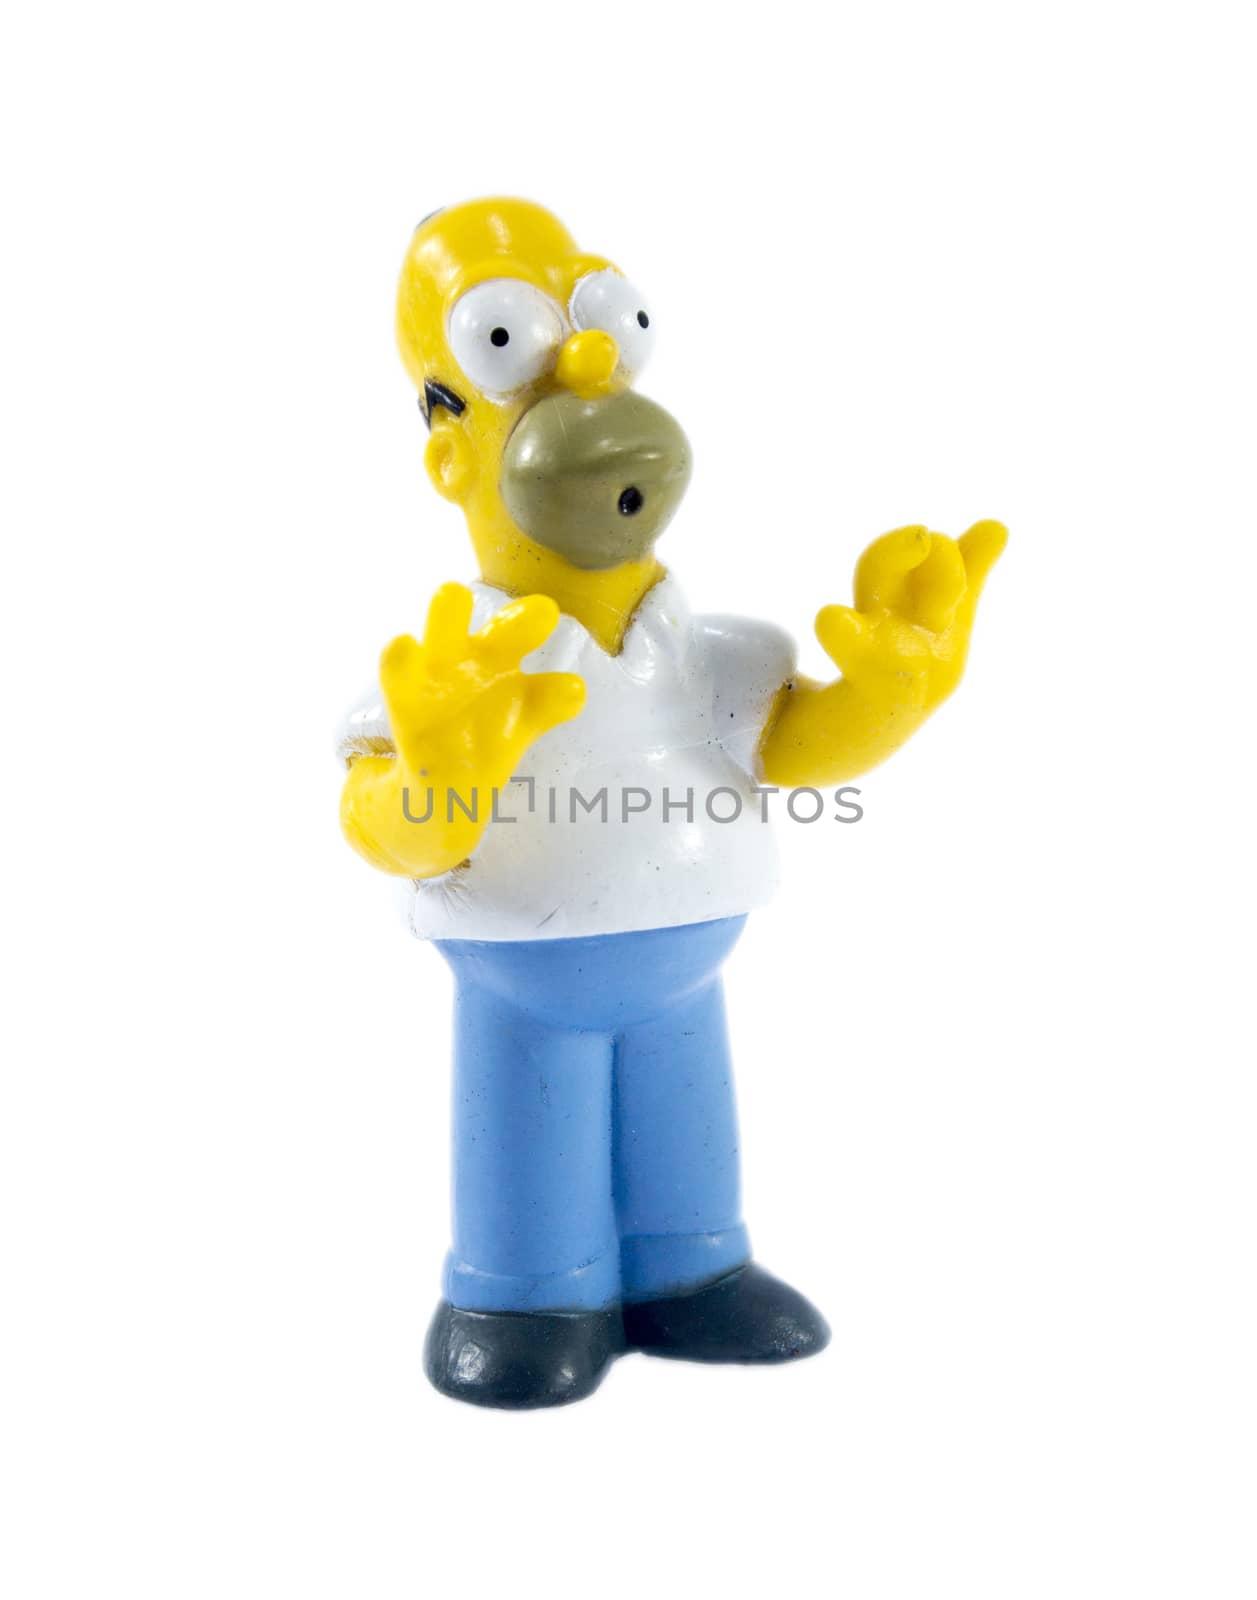 Amman, Jordan - November 1, 2014: homer Simpson figure toy character from The Simpsons family. The Simpsons is an American animated sitcom.